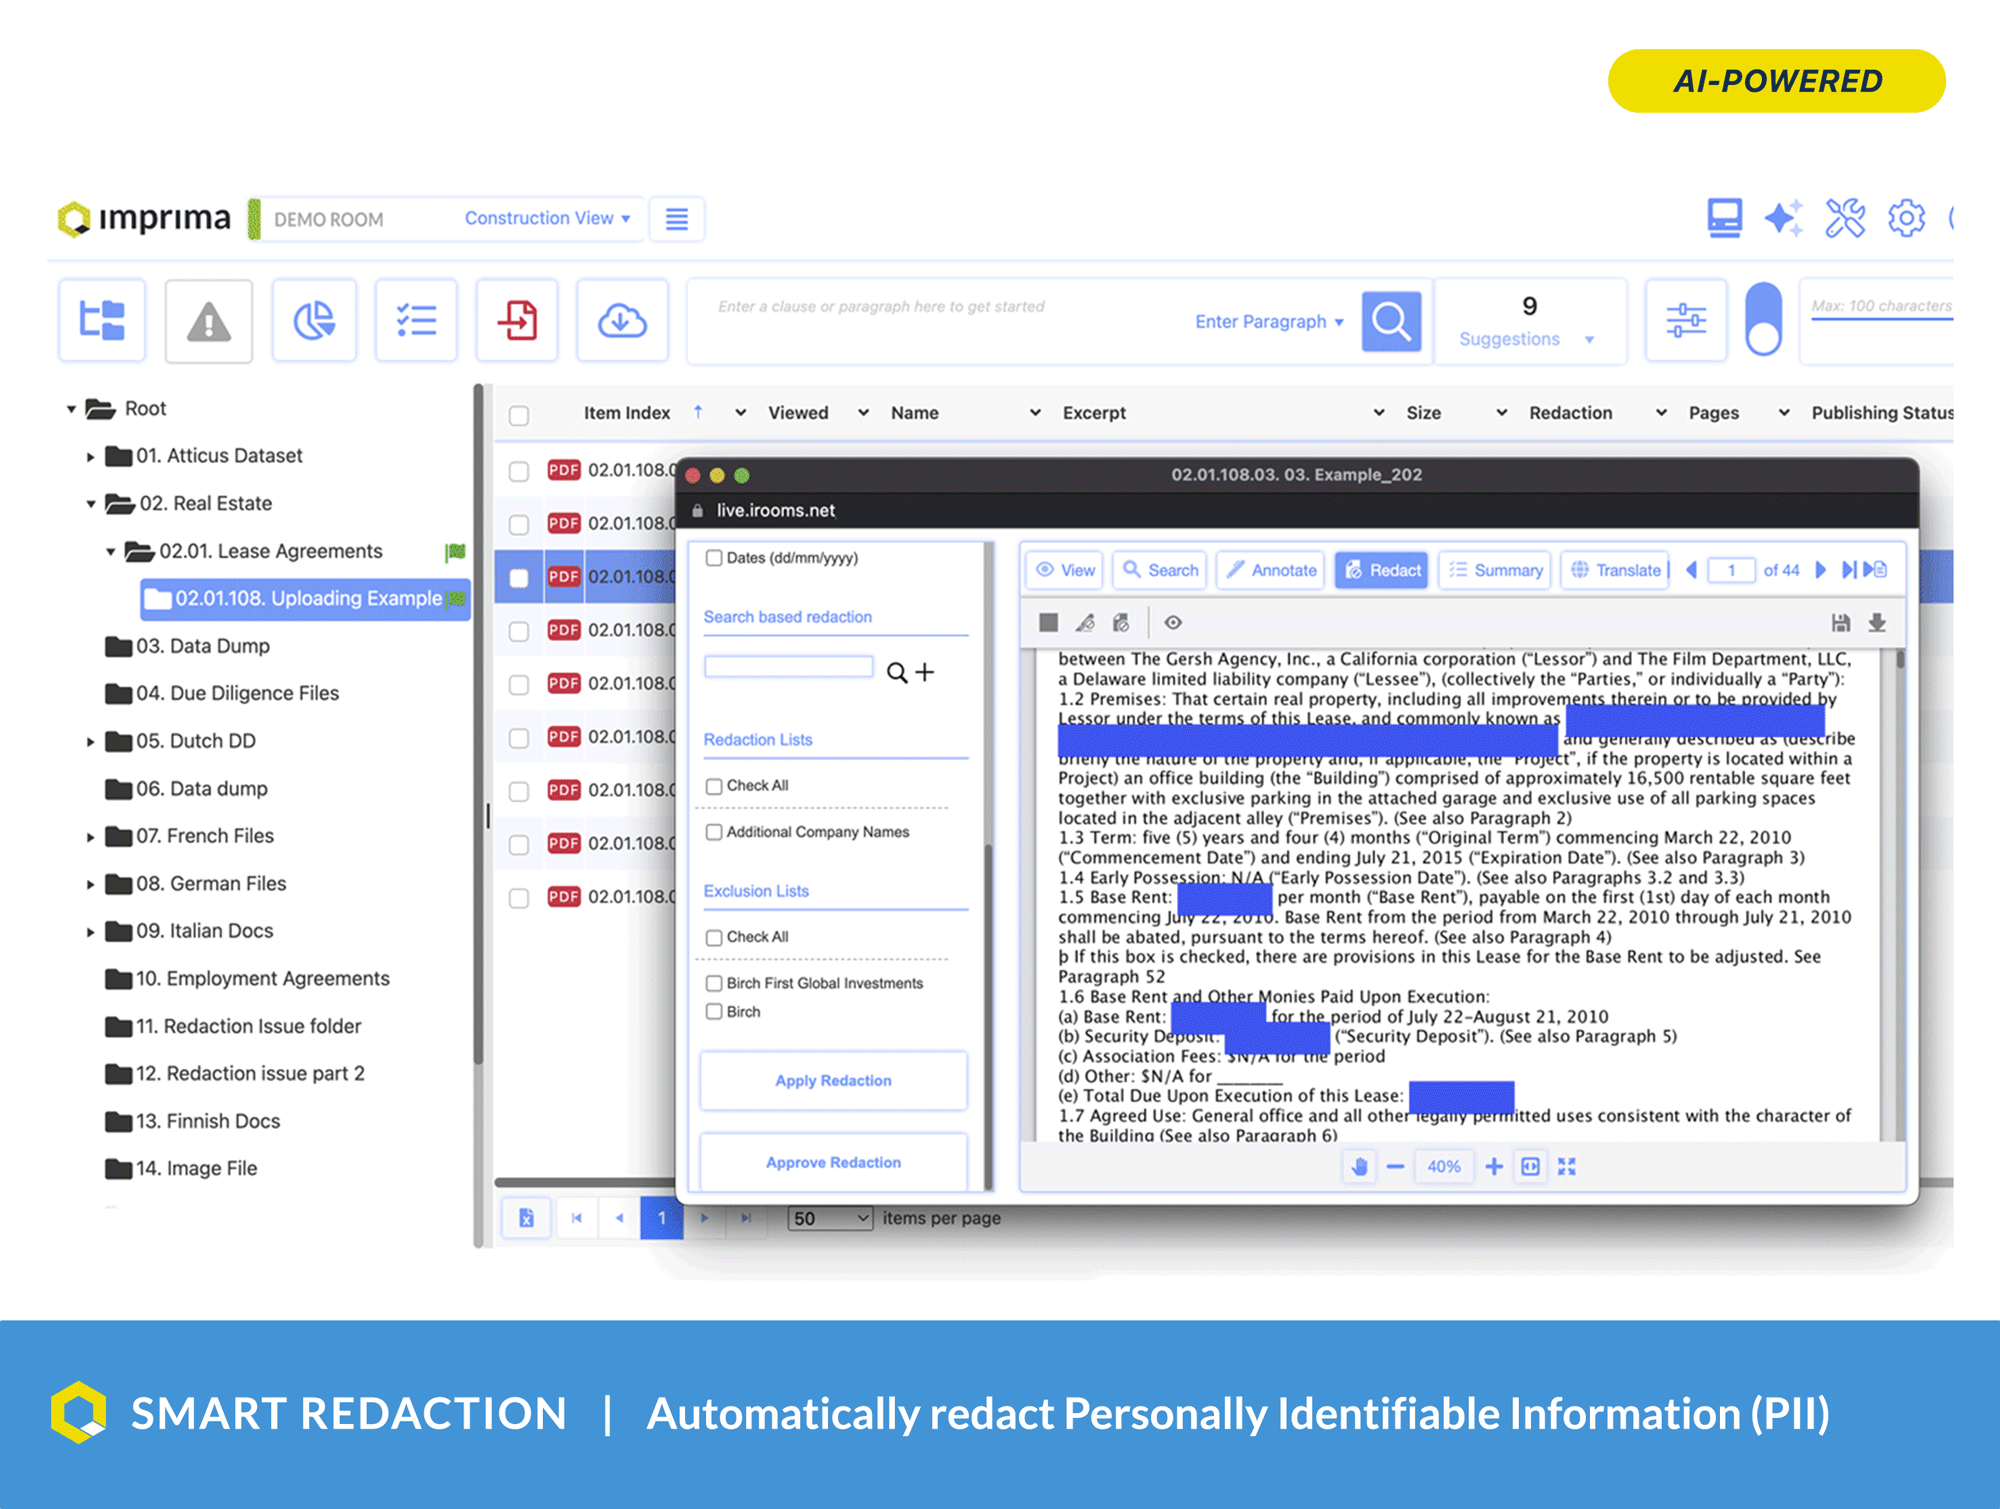 AI-powered redaction. Automatically redact Personally Identifiable Information from your documents. Driven by Large Language Models for unrivalled reliability and accuracy.